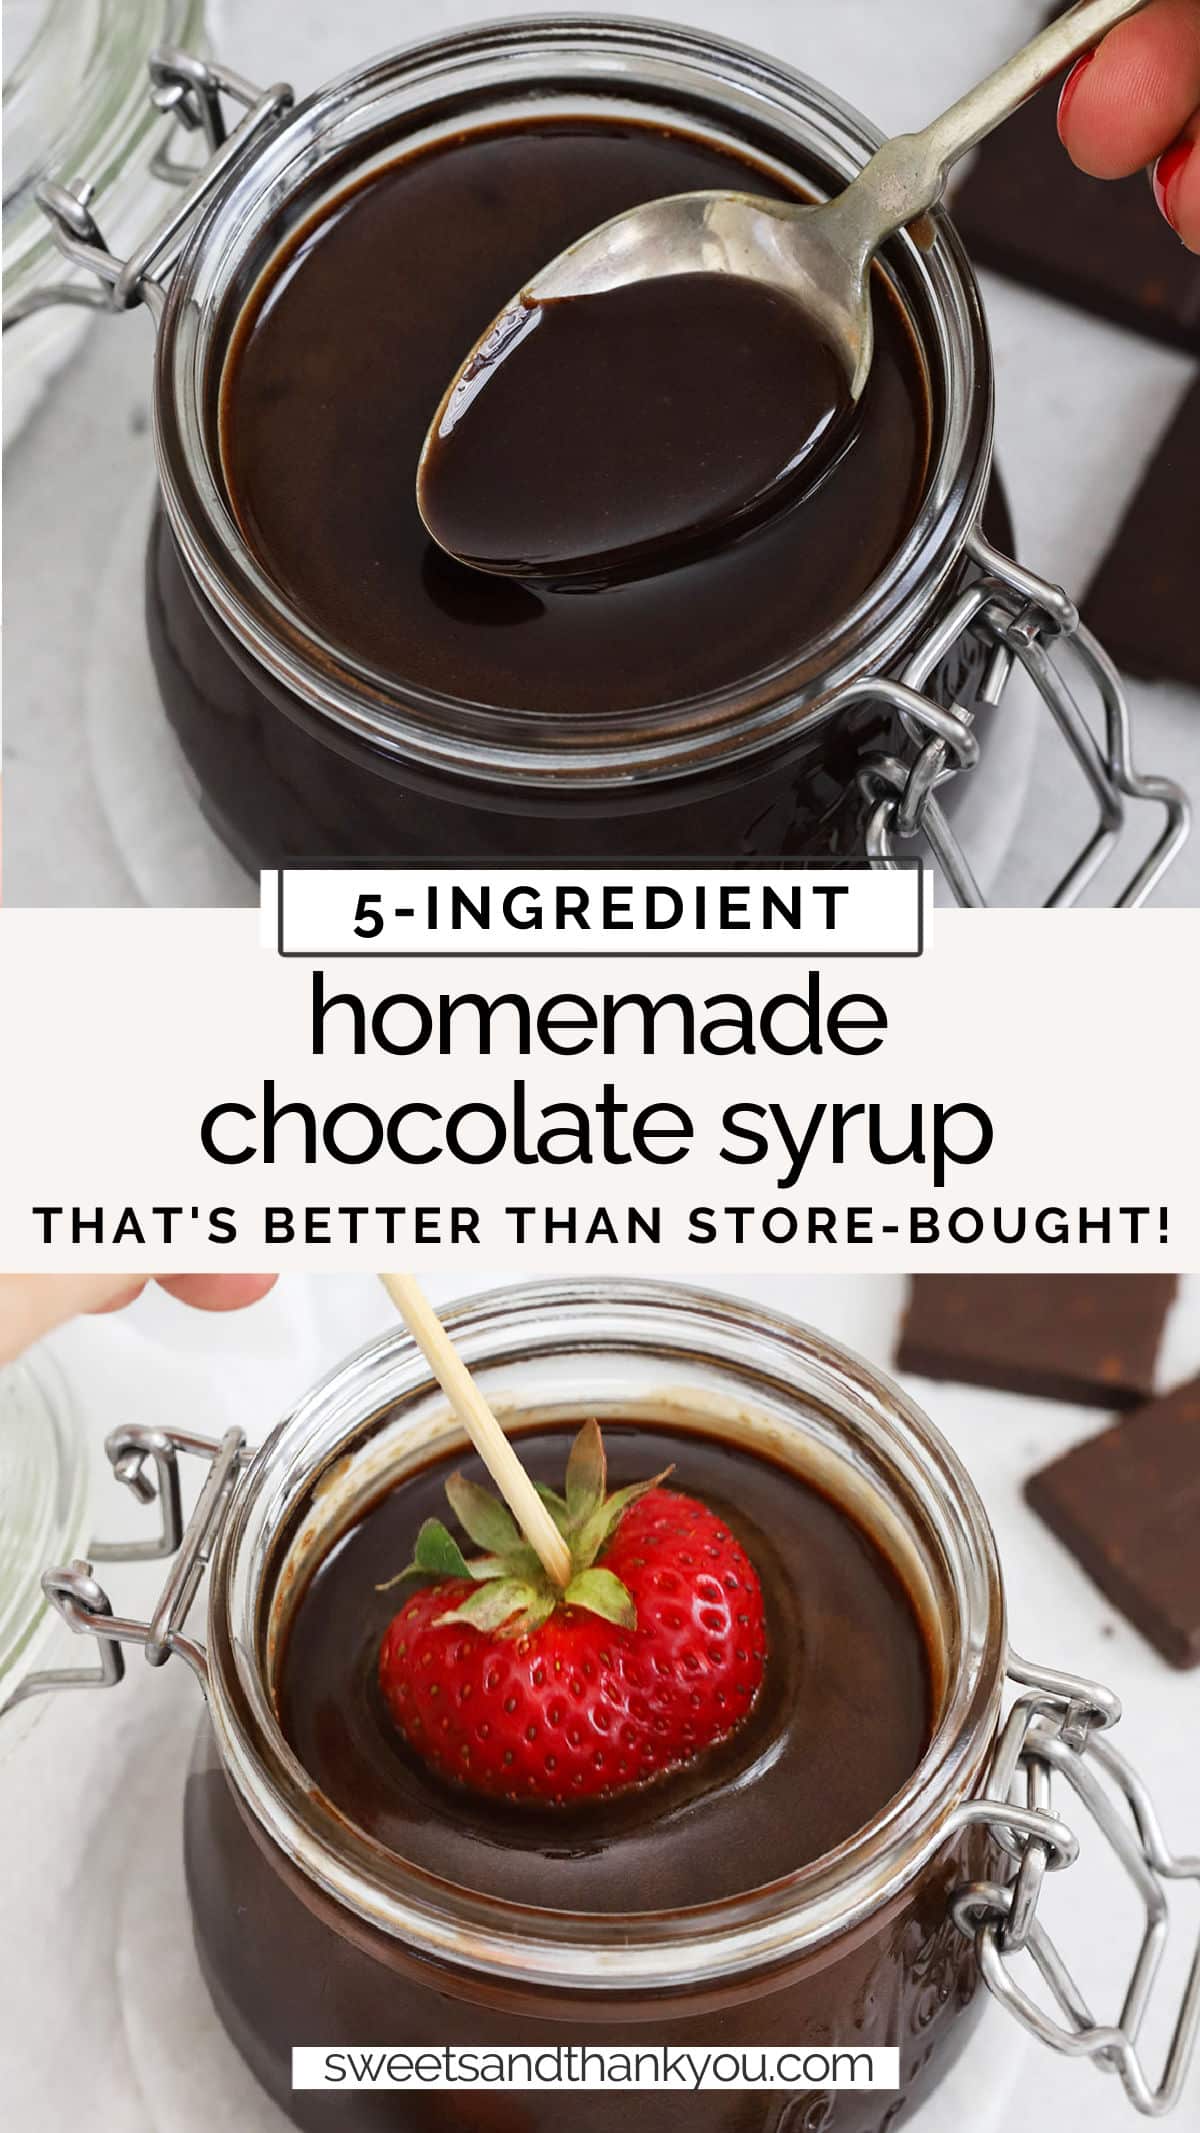 Homemade Chocolate Syrup recipe - This easy chocolate sauce is perfect for ice cream, chocolate milk, and so much more. It's like homemade Hershey's syrup! // Hersheys syrup copycat // homemade chocolate sauce / chocolate sauce fruit dip / 5 ingredient chocolate sauce / chocolate sauce for ice cream / cake plating chocolate sauce / chocolate syrup for ice cream / chocolate syrup fruit dip / hershey's syrup copycat / homemade hershey's chocolate syrup / chocolate syrup for chocolate milk